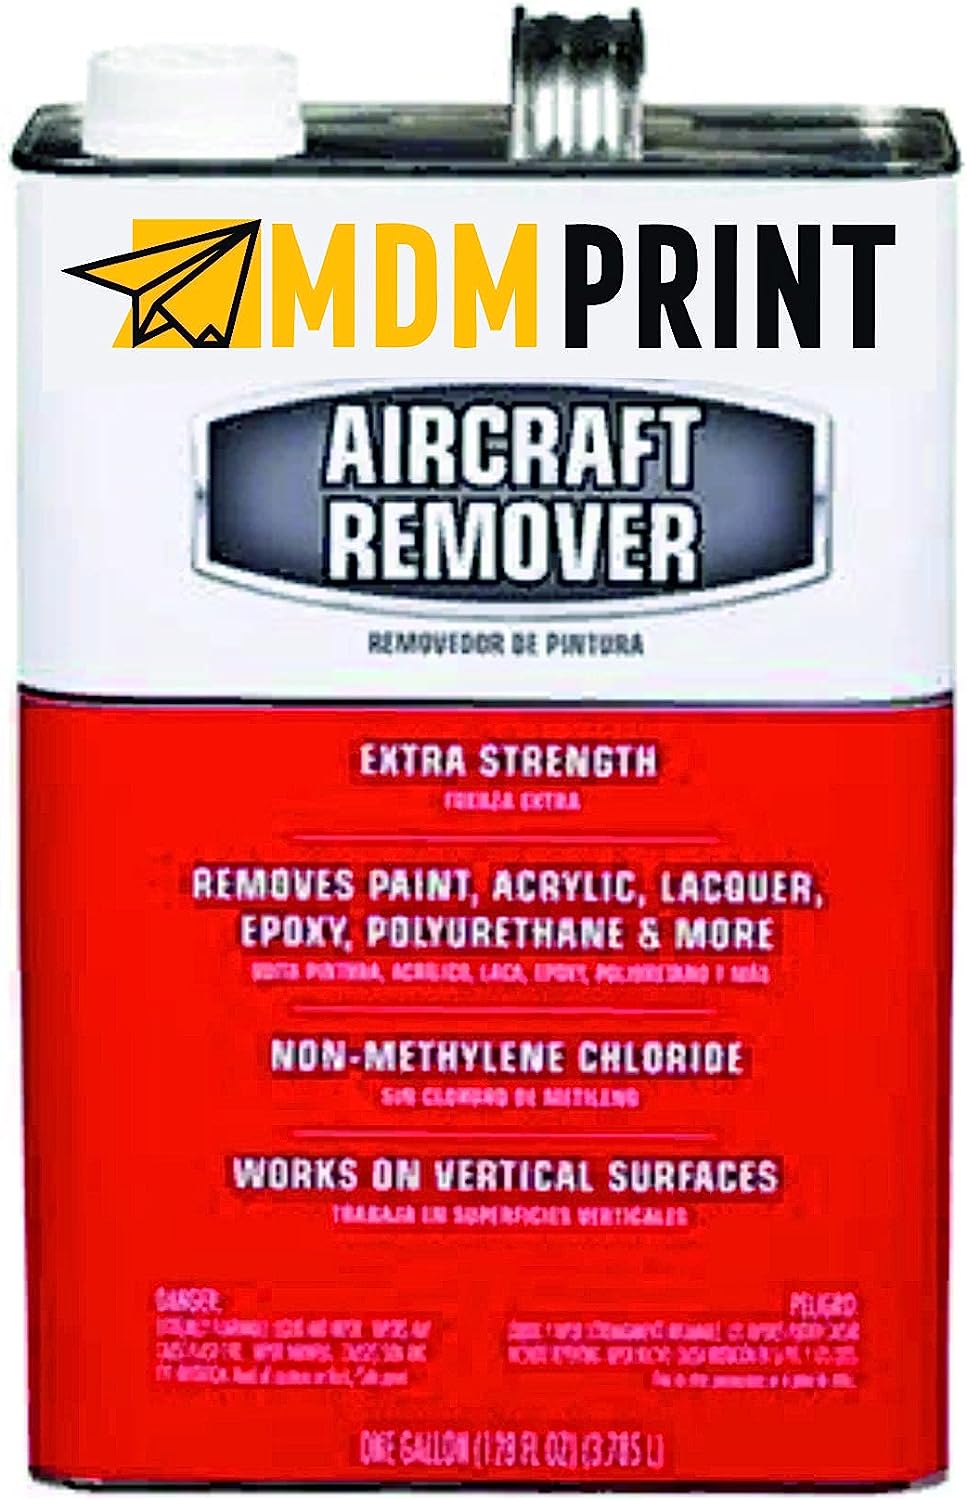 Aircraft Remover 323171 (1 Gallon) Removes Paint, [...]